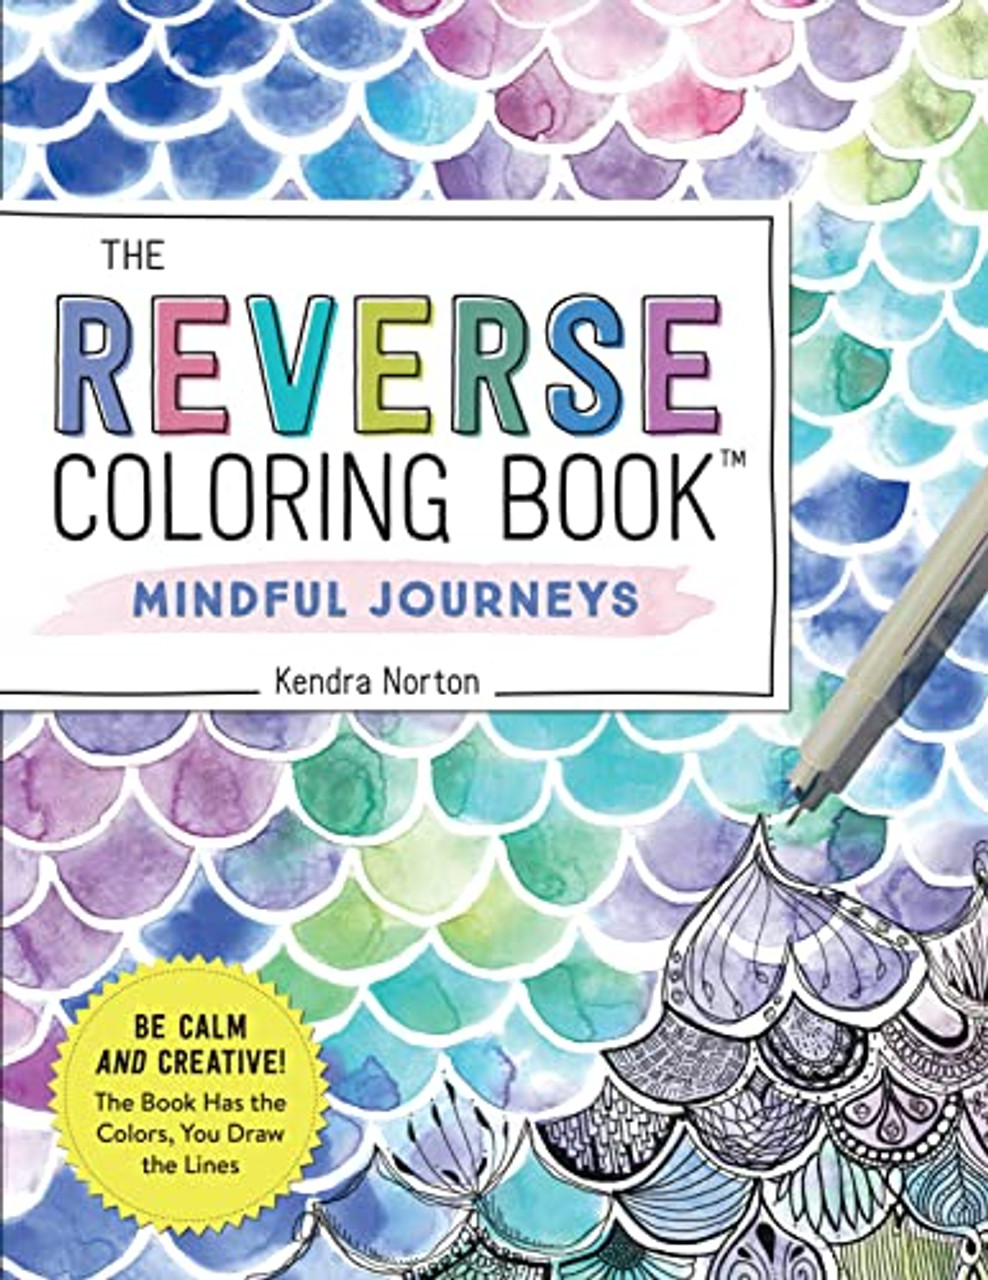 The Reverse Coloring Book: Mindful Journeys - Wet Paint Artists